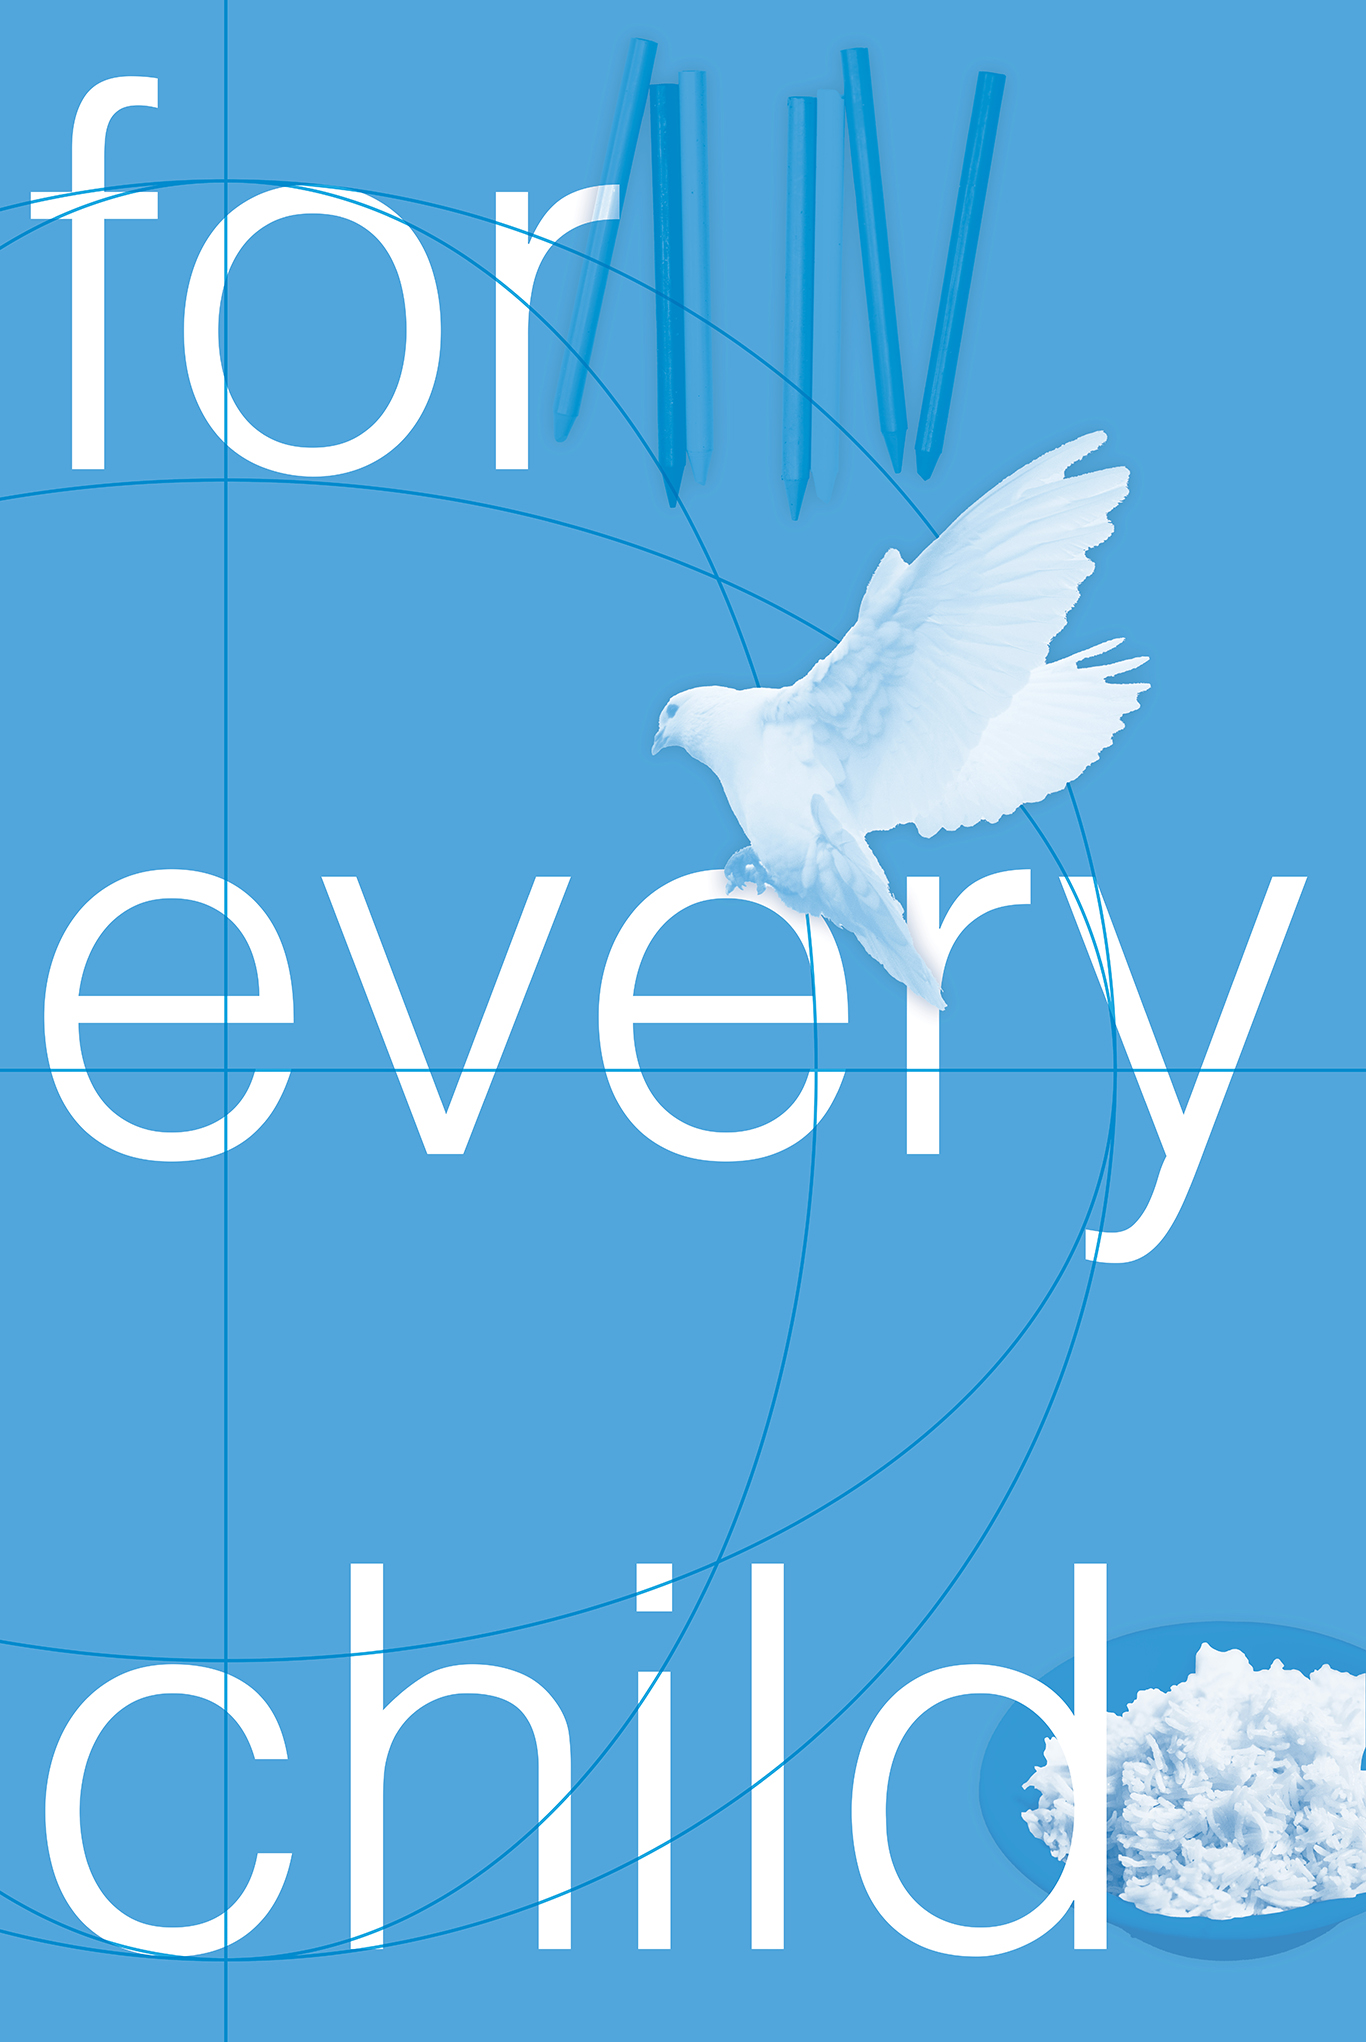 A blue poster with images of blue colored pencils, a white dove, and a bowl of rice with large white text that reads “for every child”.